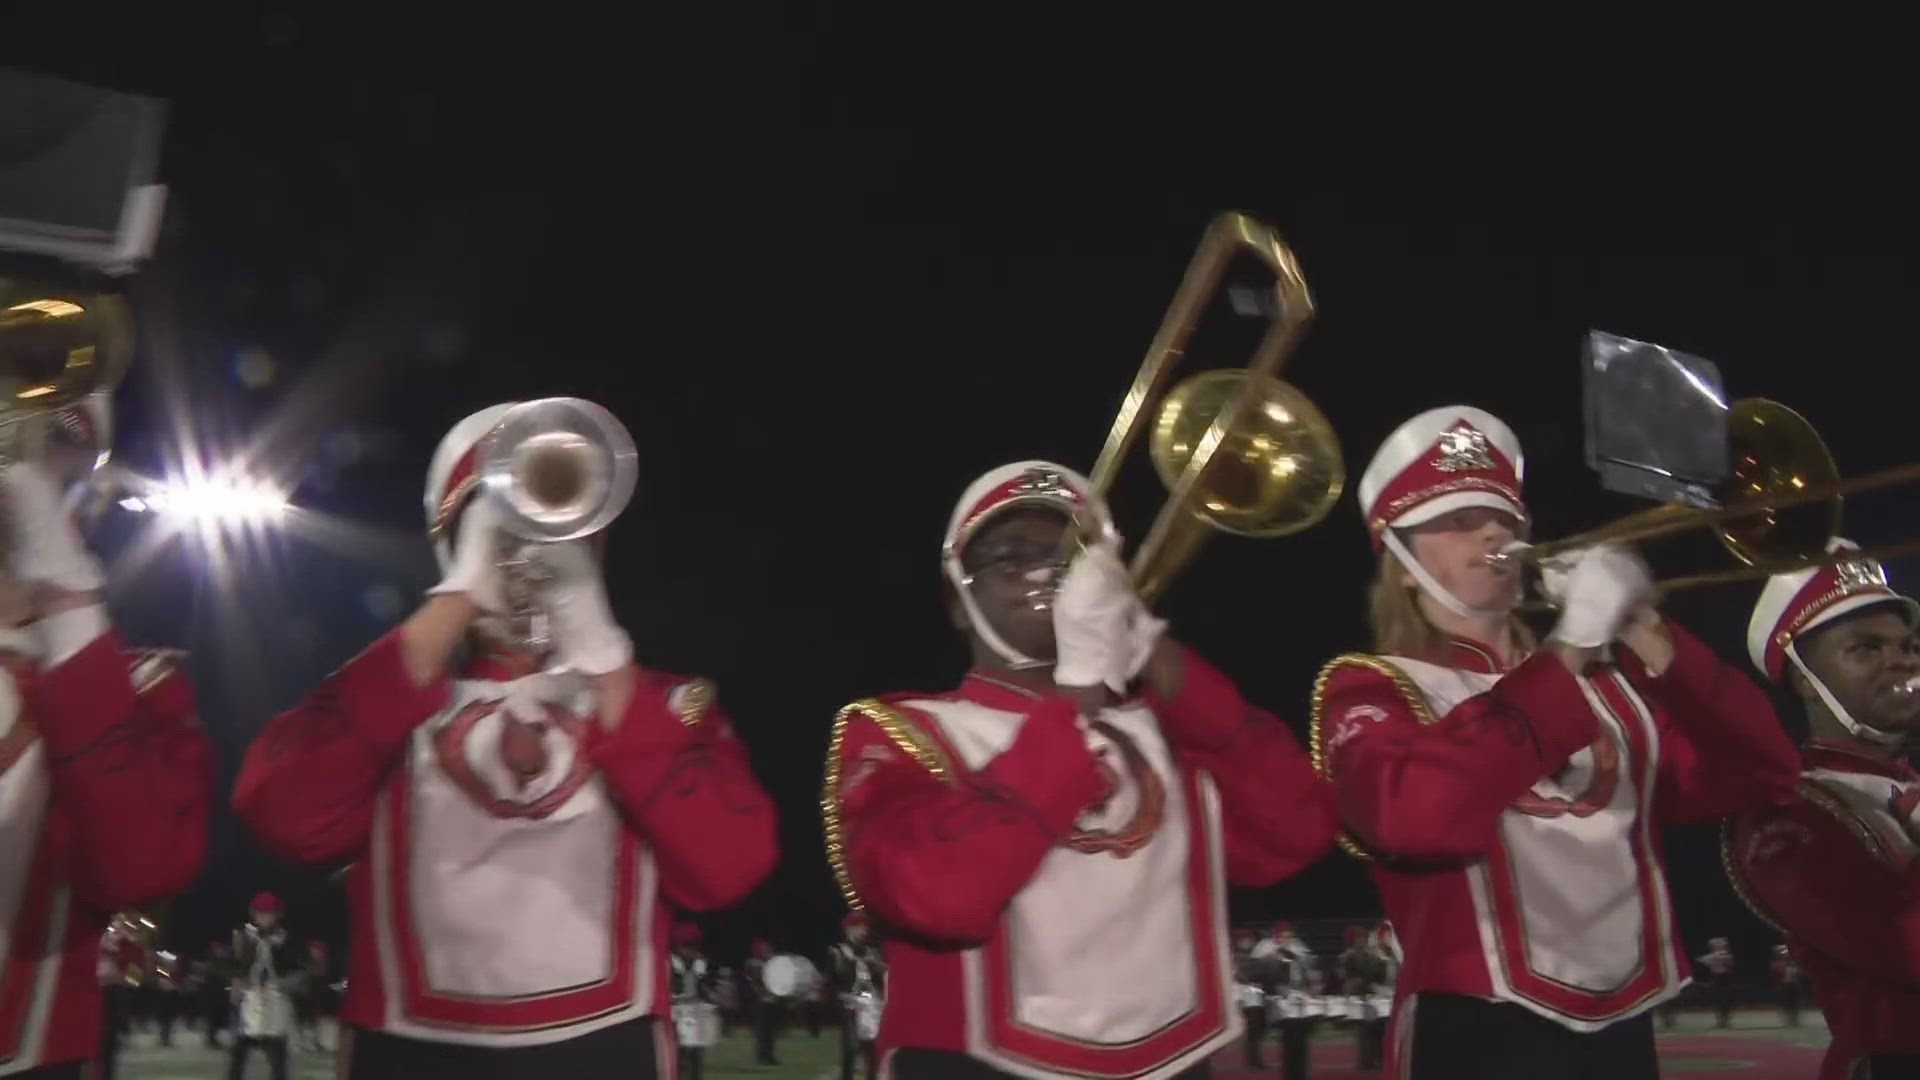 We're learning more about the Shaker Heights High School marching band as they prepare for their national appearance on NBC's 'TODAY.'